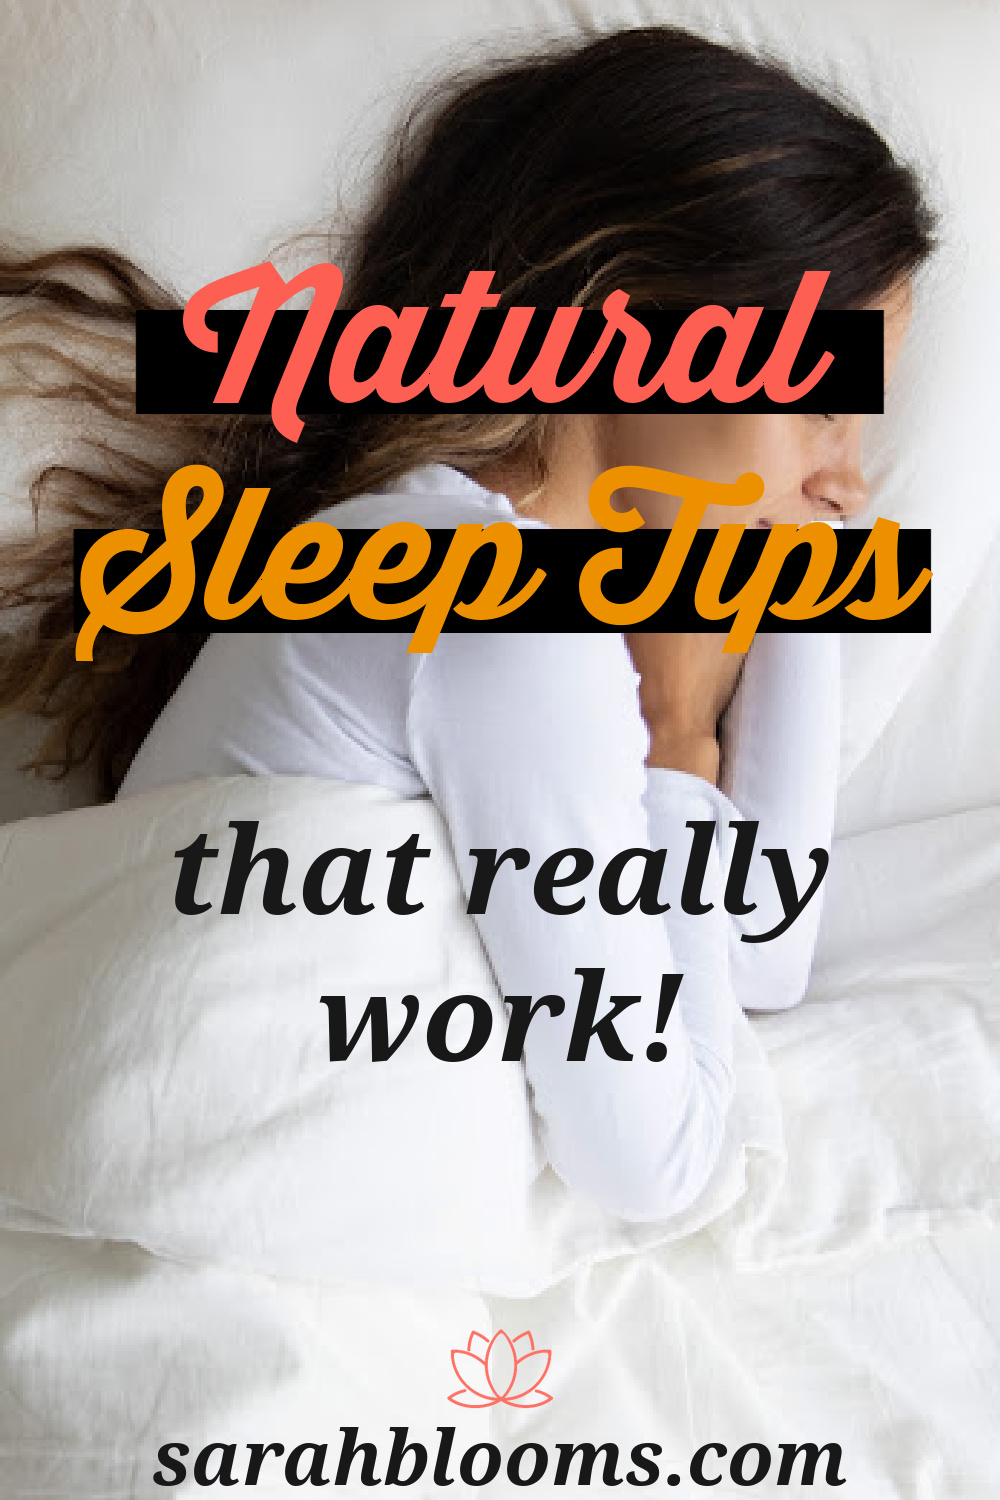 Finally get some quality sleep with these 25 Natural Sleep Tips that actually work! #sleeptips #naturalsleeptips #healthytips #healthyhabits #sarahblooms